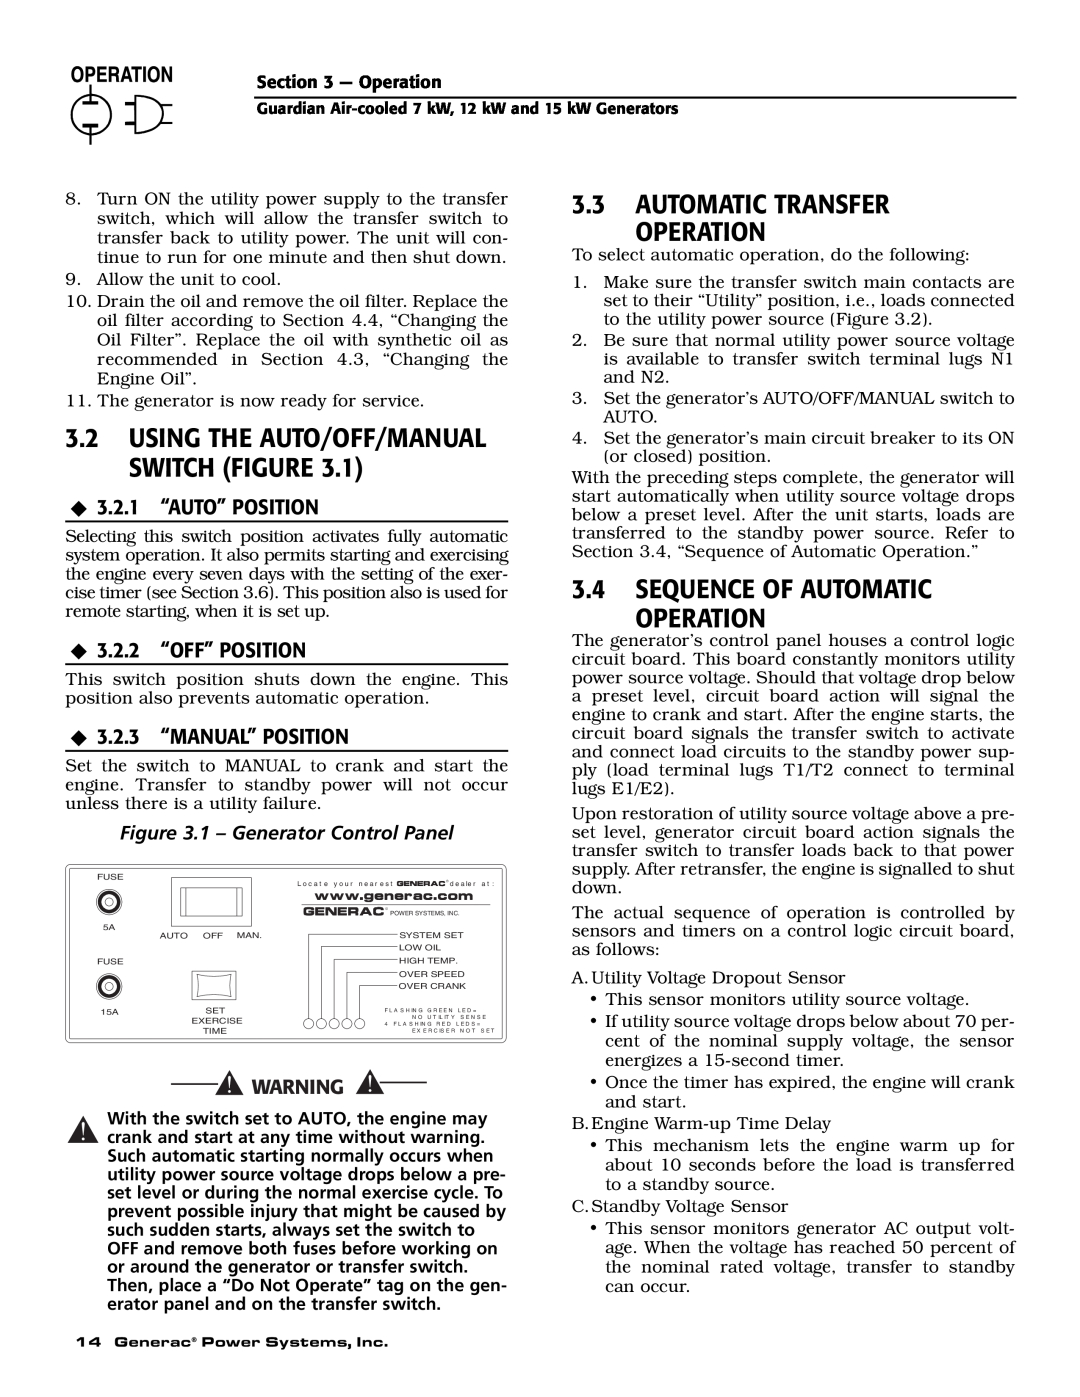 Generac Power Systems 04758-1, 04759-1, 04760-1 owner manual Automatic Transfer Operation, Sequence Of Automatic Operation 